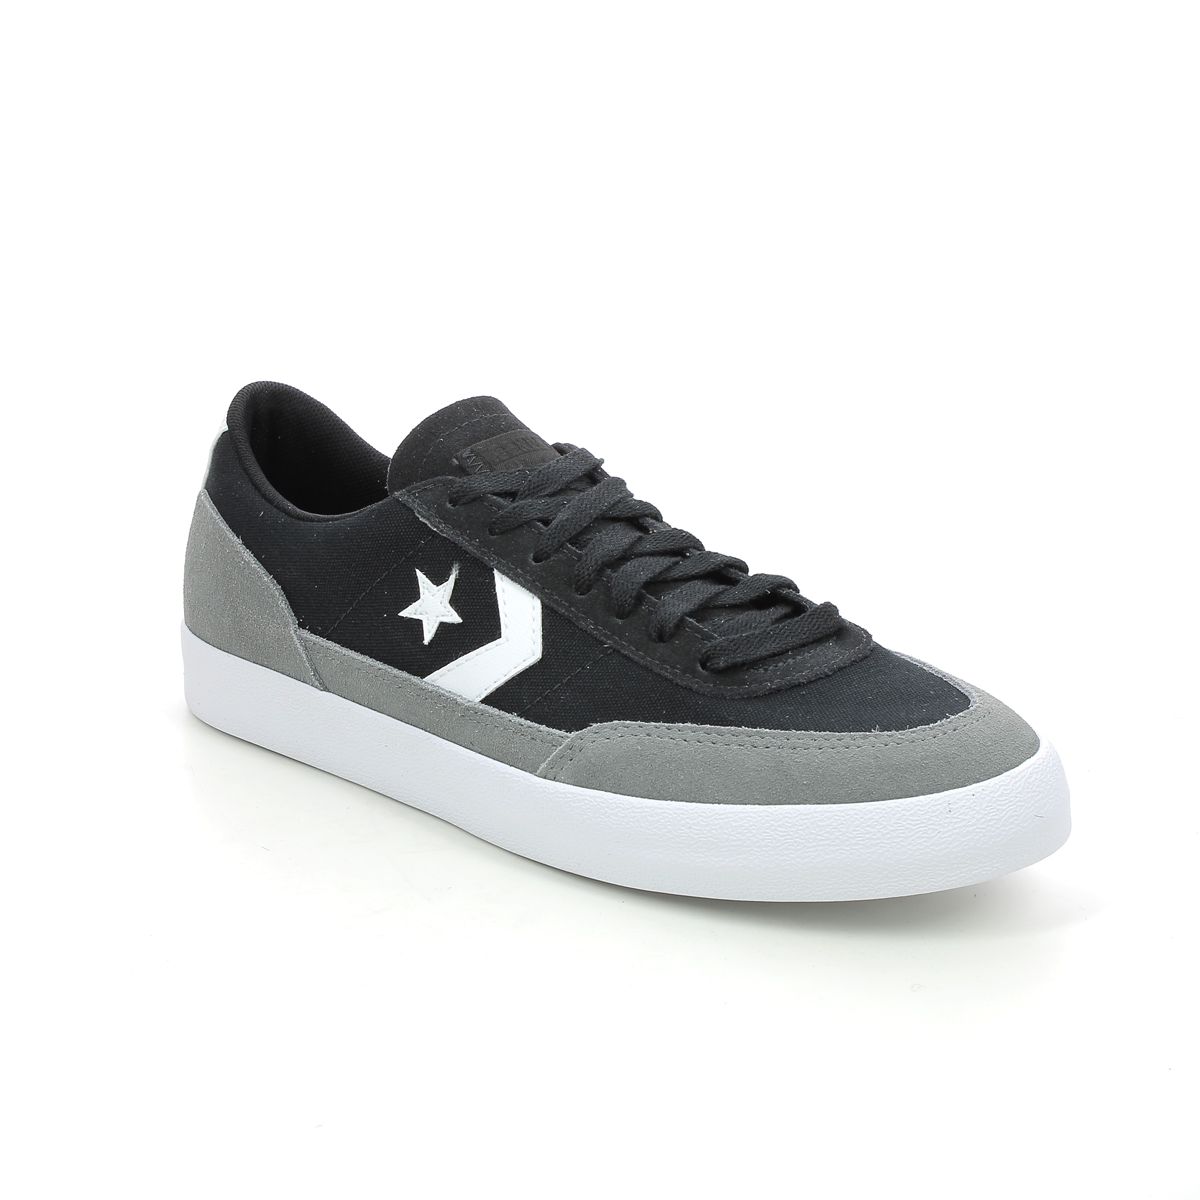 Converse Net Star Black grey Mens trainers 170715C-014 in a Plain  in Size 8